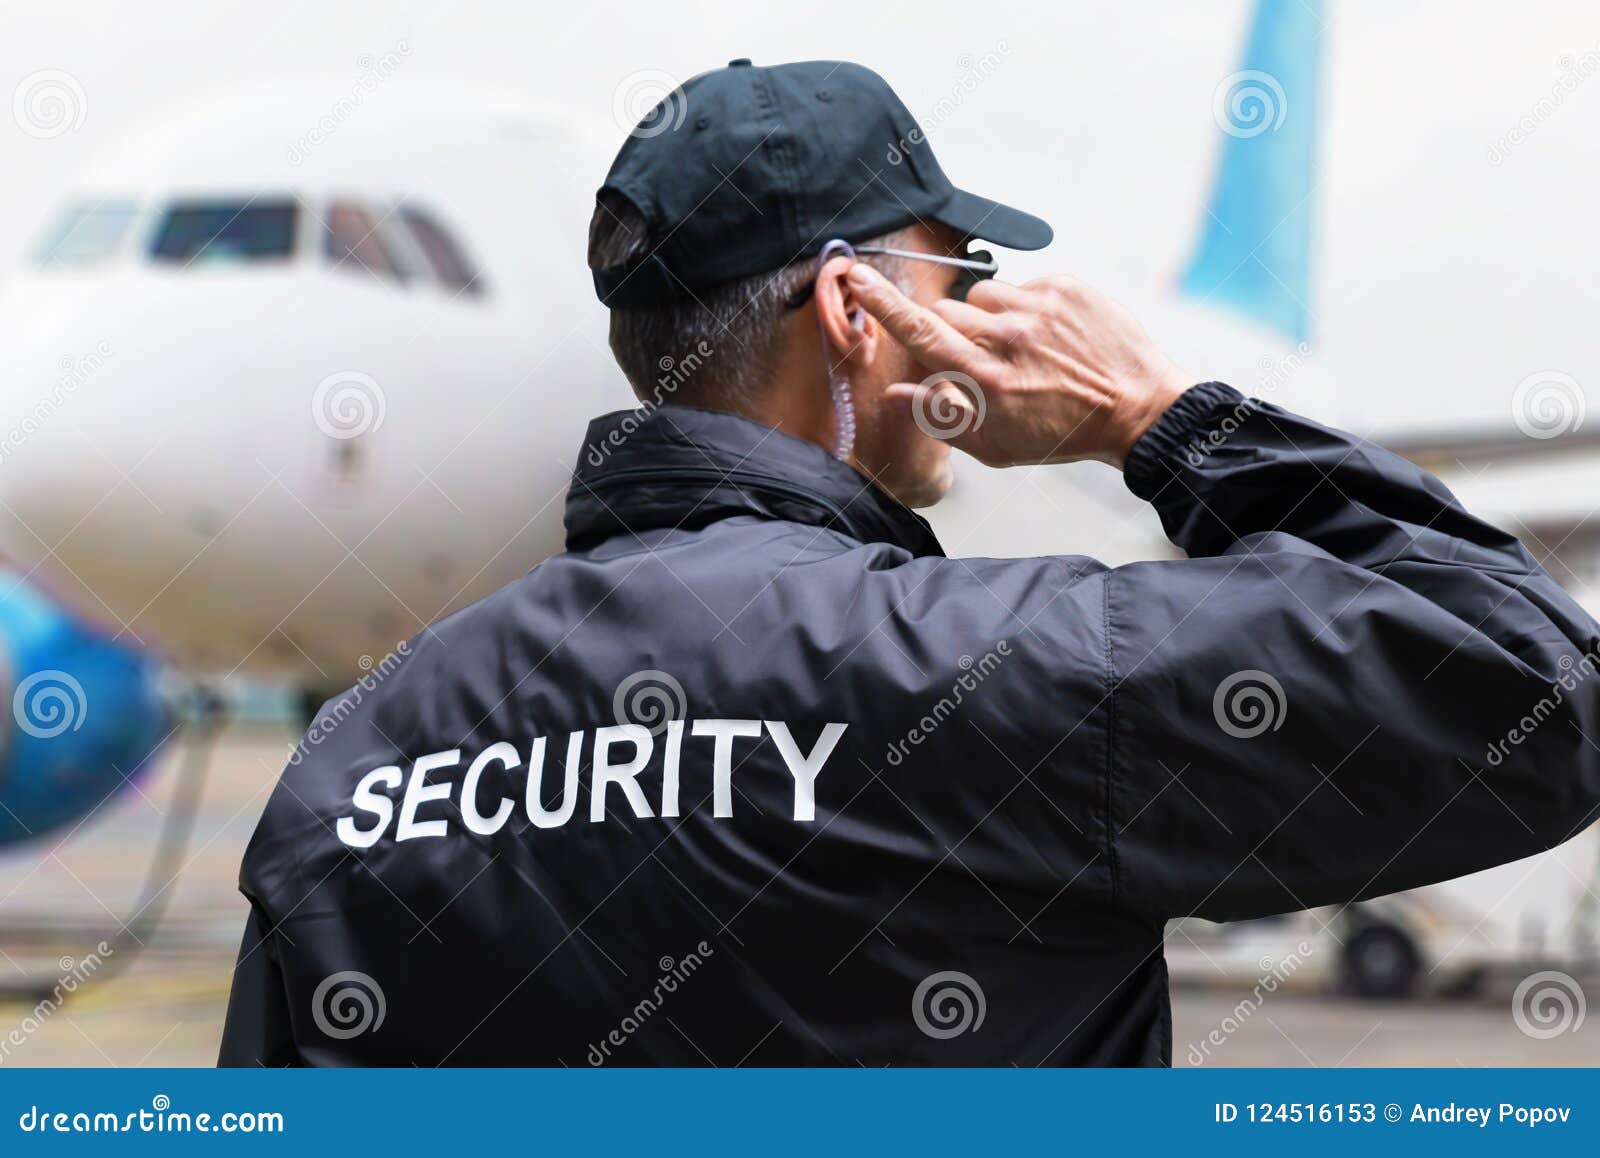 rear view of a security guard